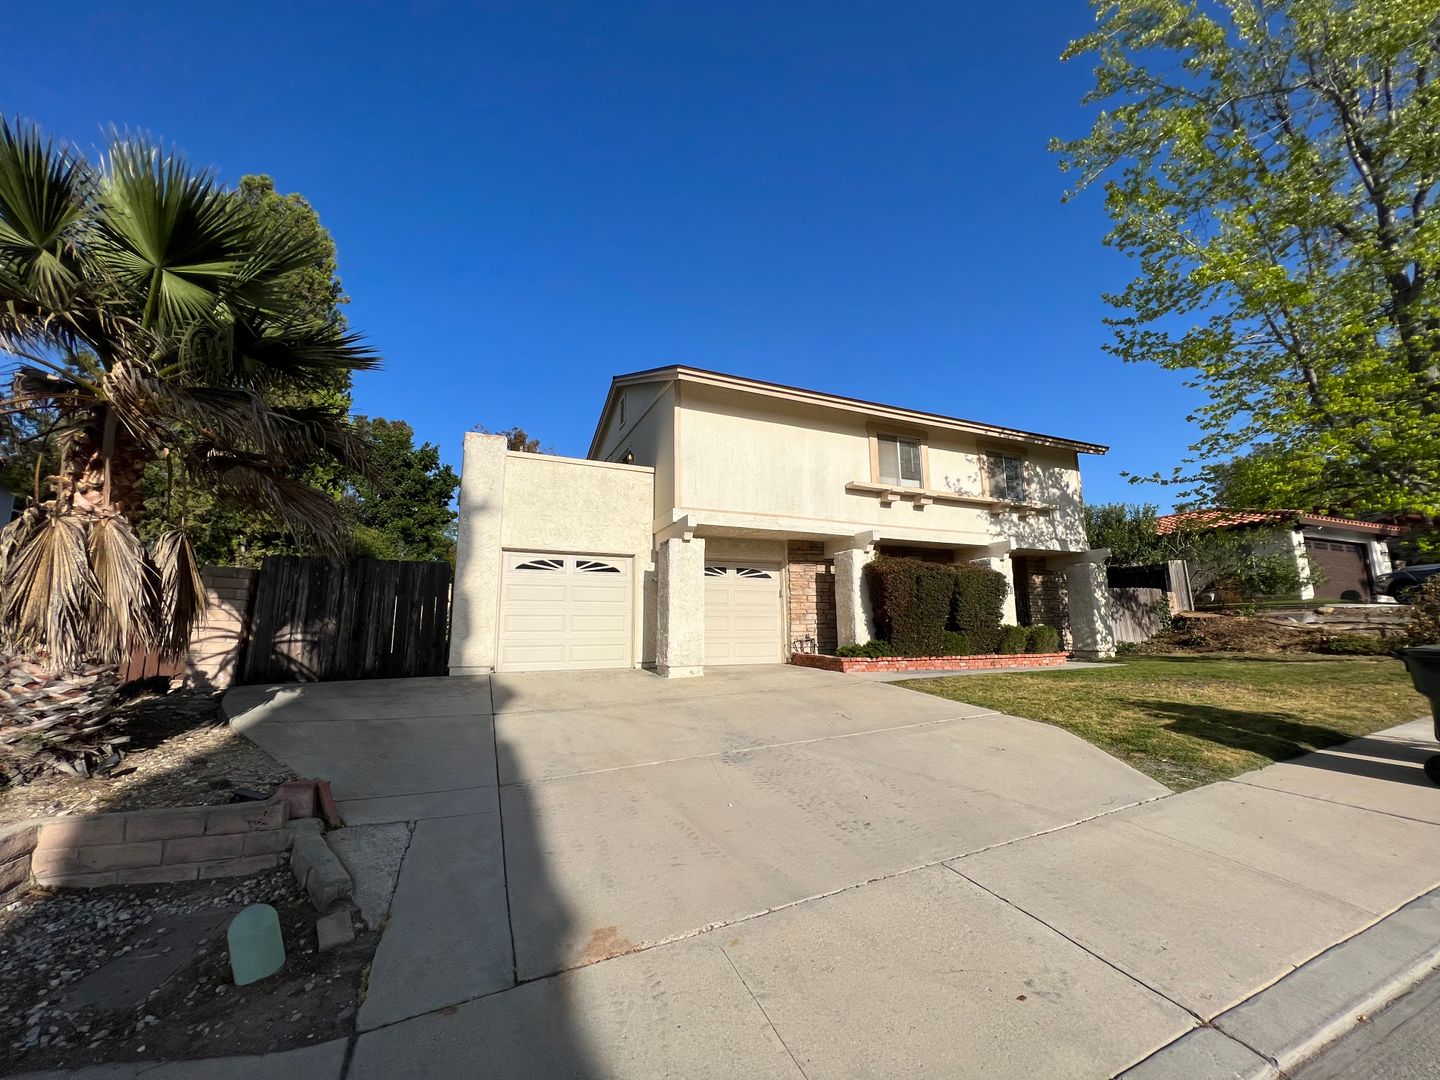 2 Story 4 bed, 2 1/2 bath home in Thousand Oaks!